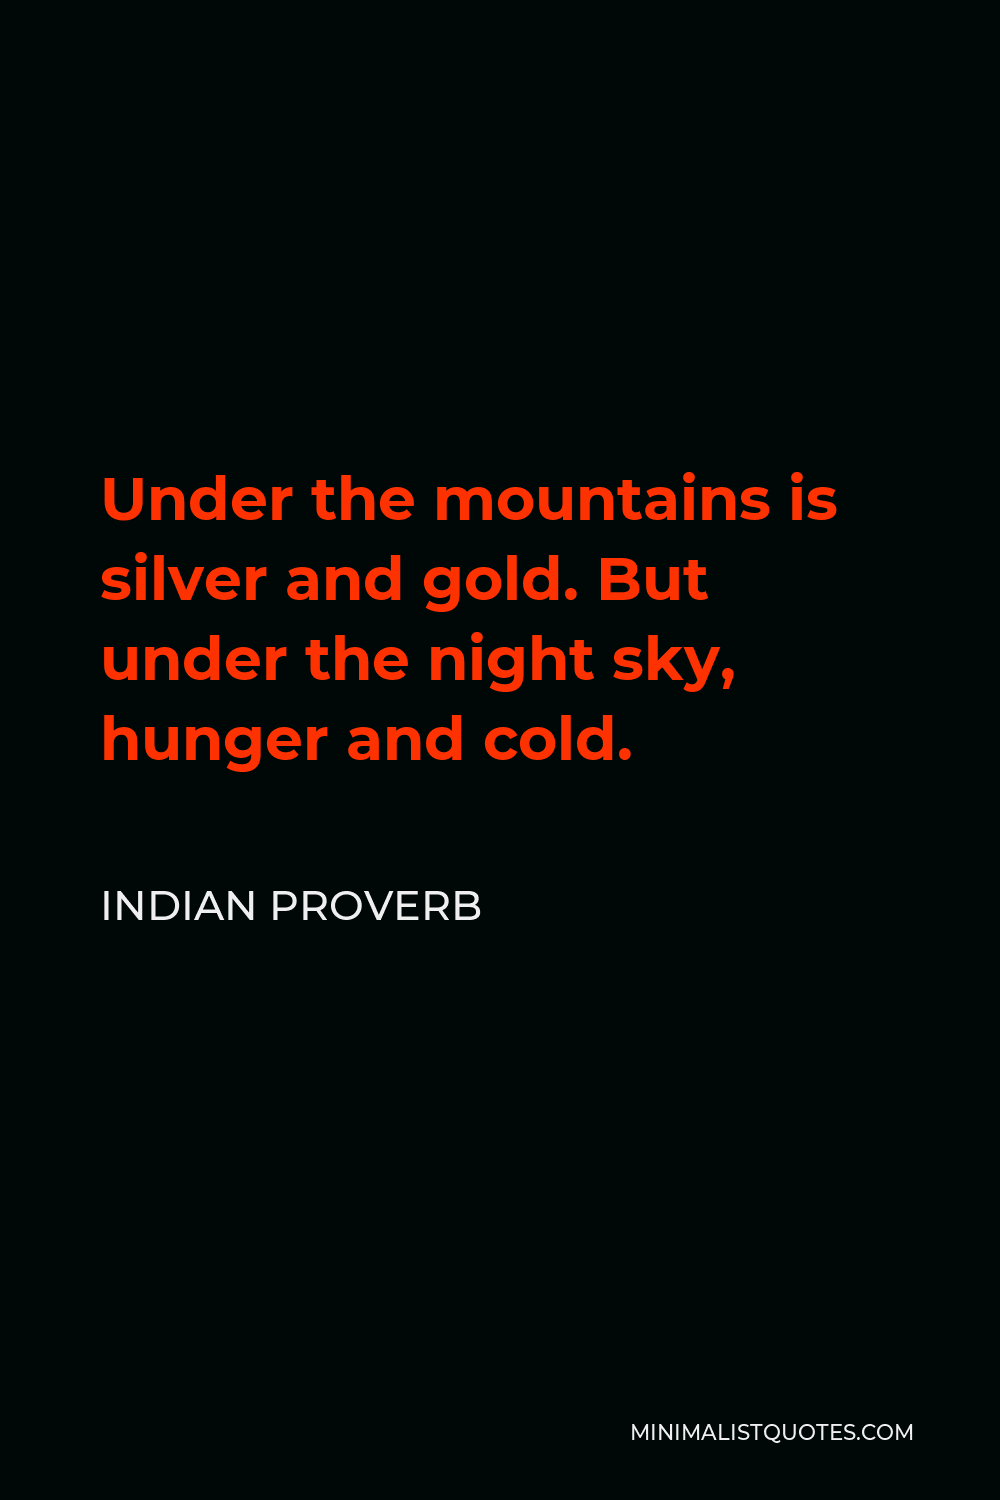 Indian Proverb Quote - Under the mountains is silver and gold. But under the night sky, hunger and cold.